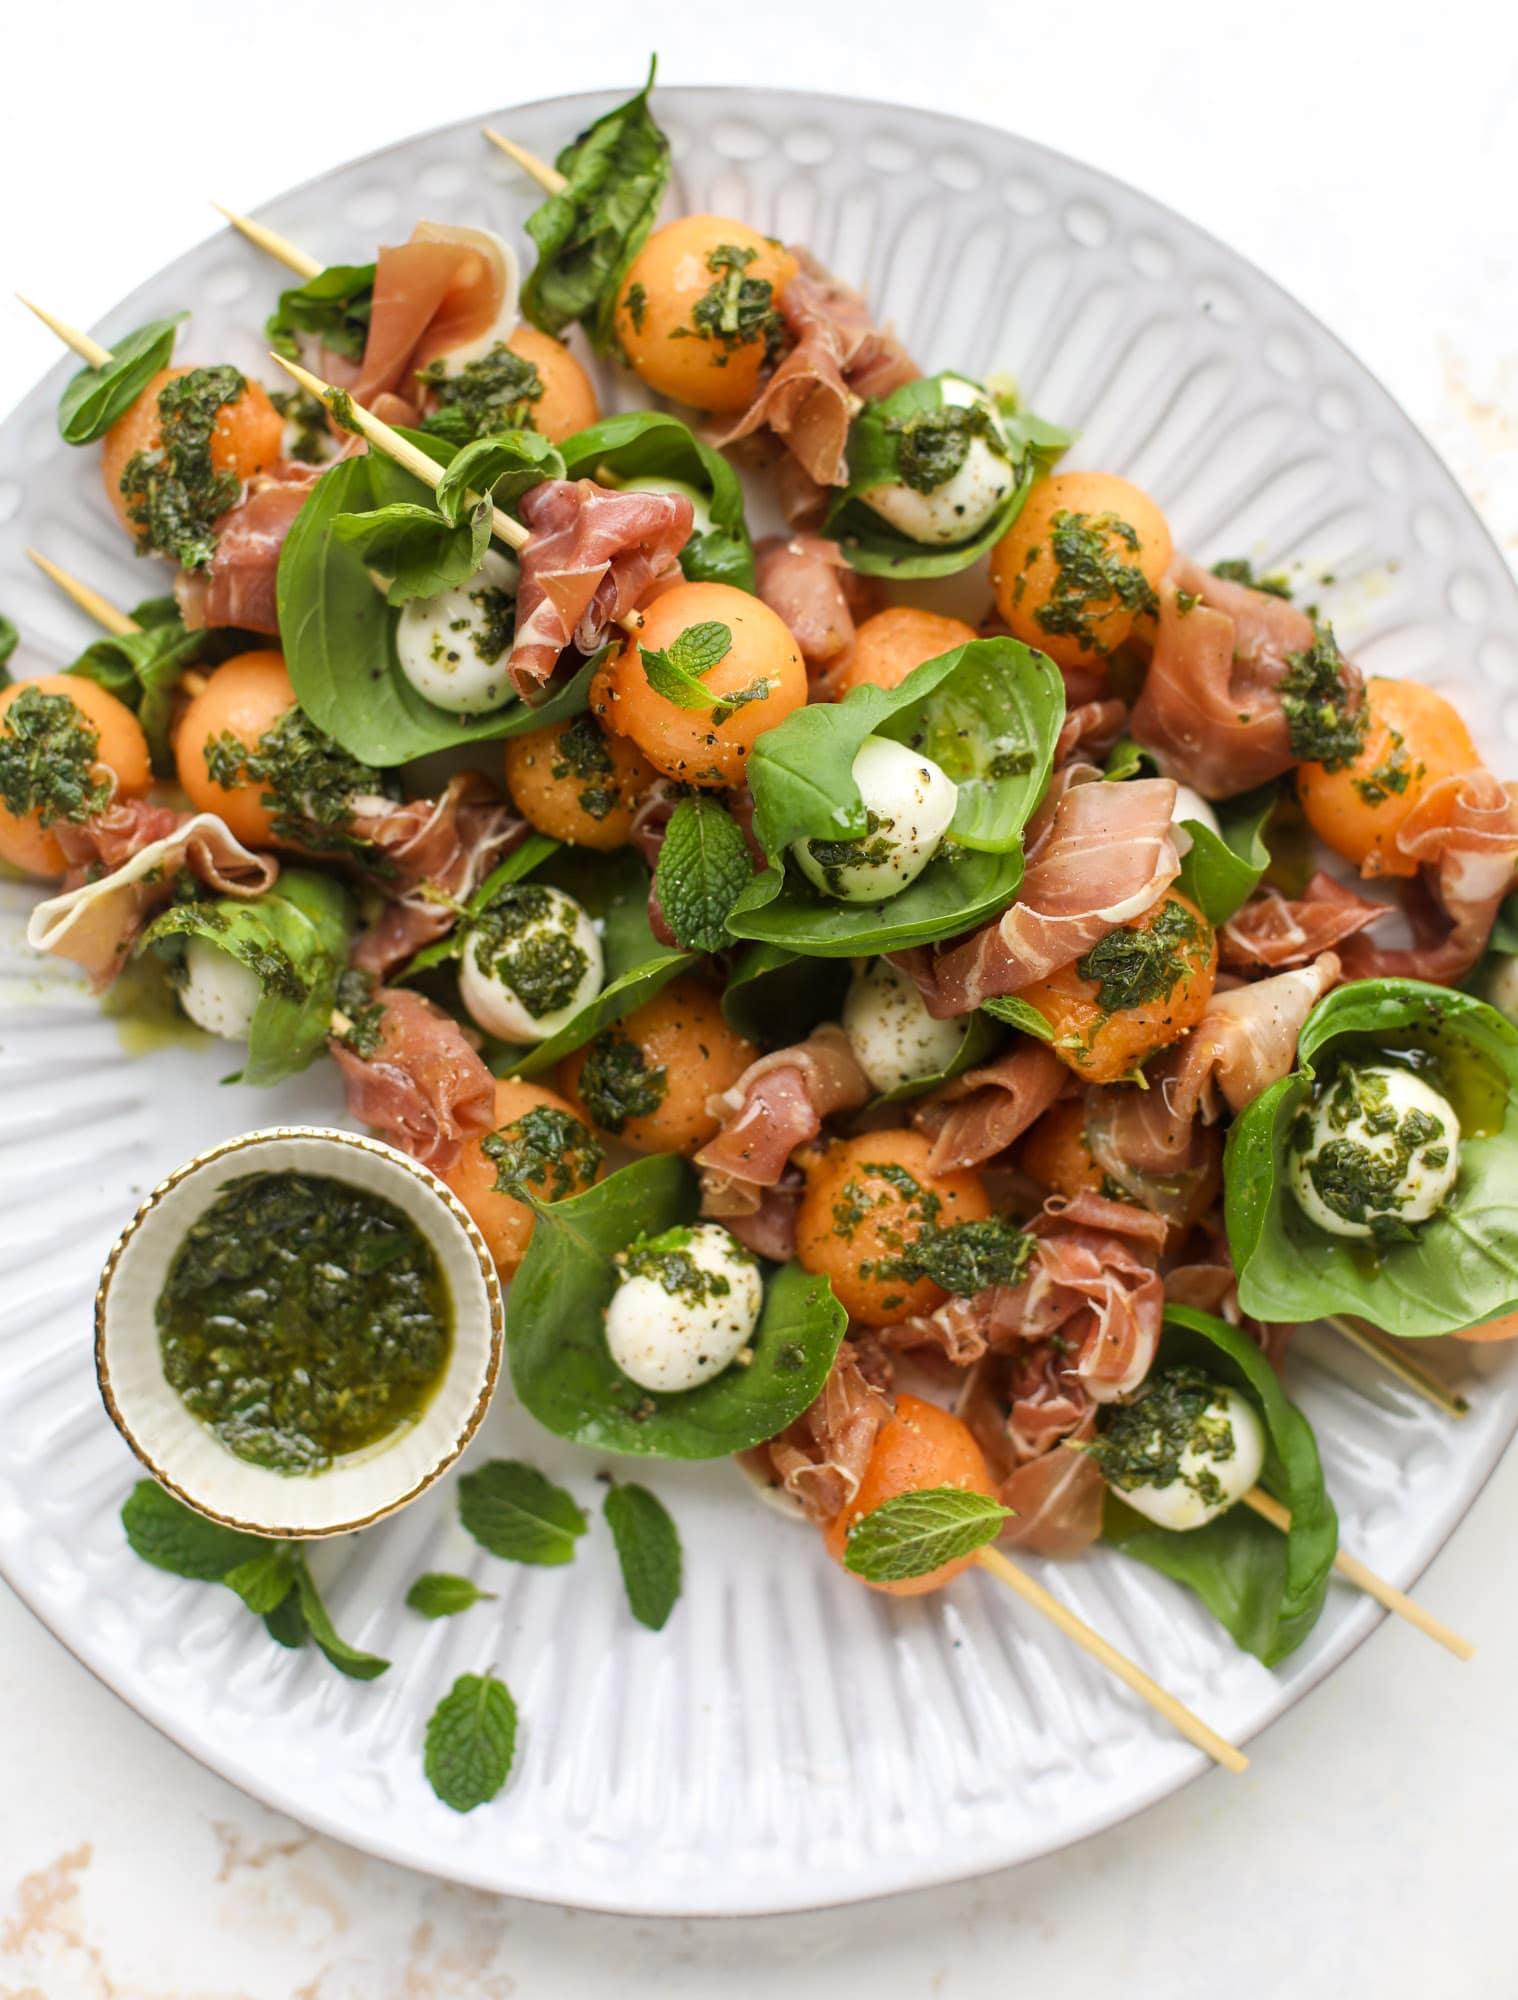 These cantaloupe prosciutto skewers are the perfect cantoloupe caprese snack! Salty prosciutto, sweet melon and fresh mozzarella drizzled with mint pesto!